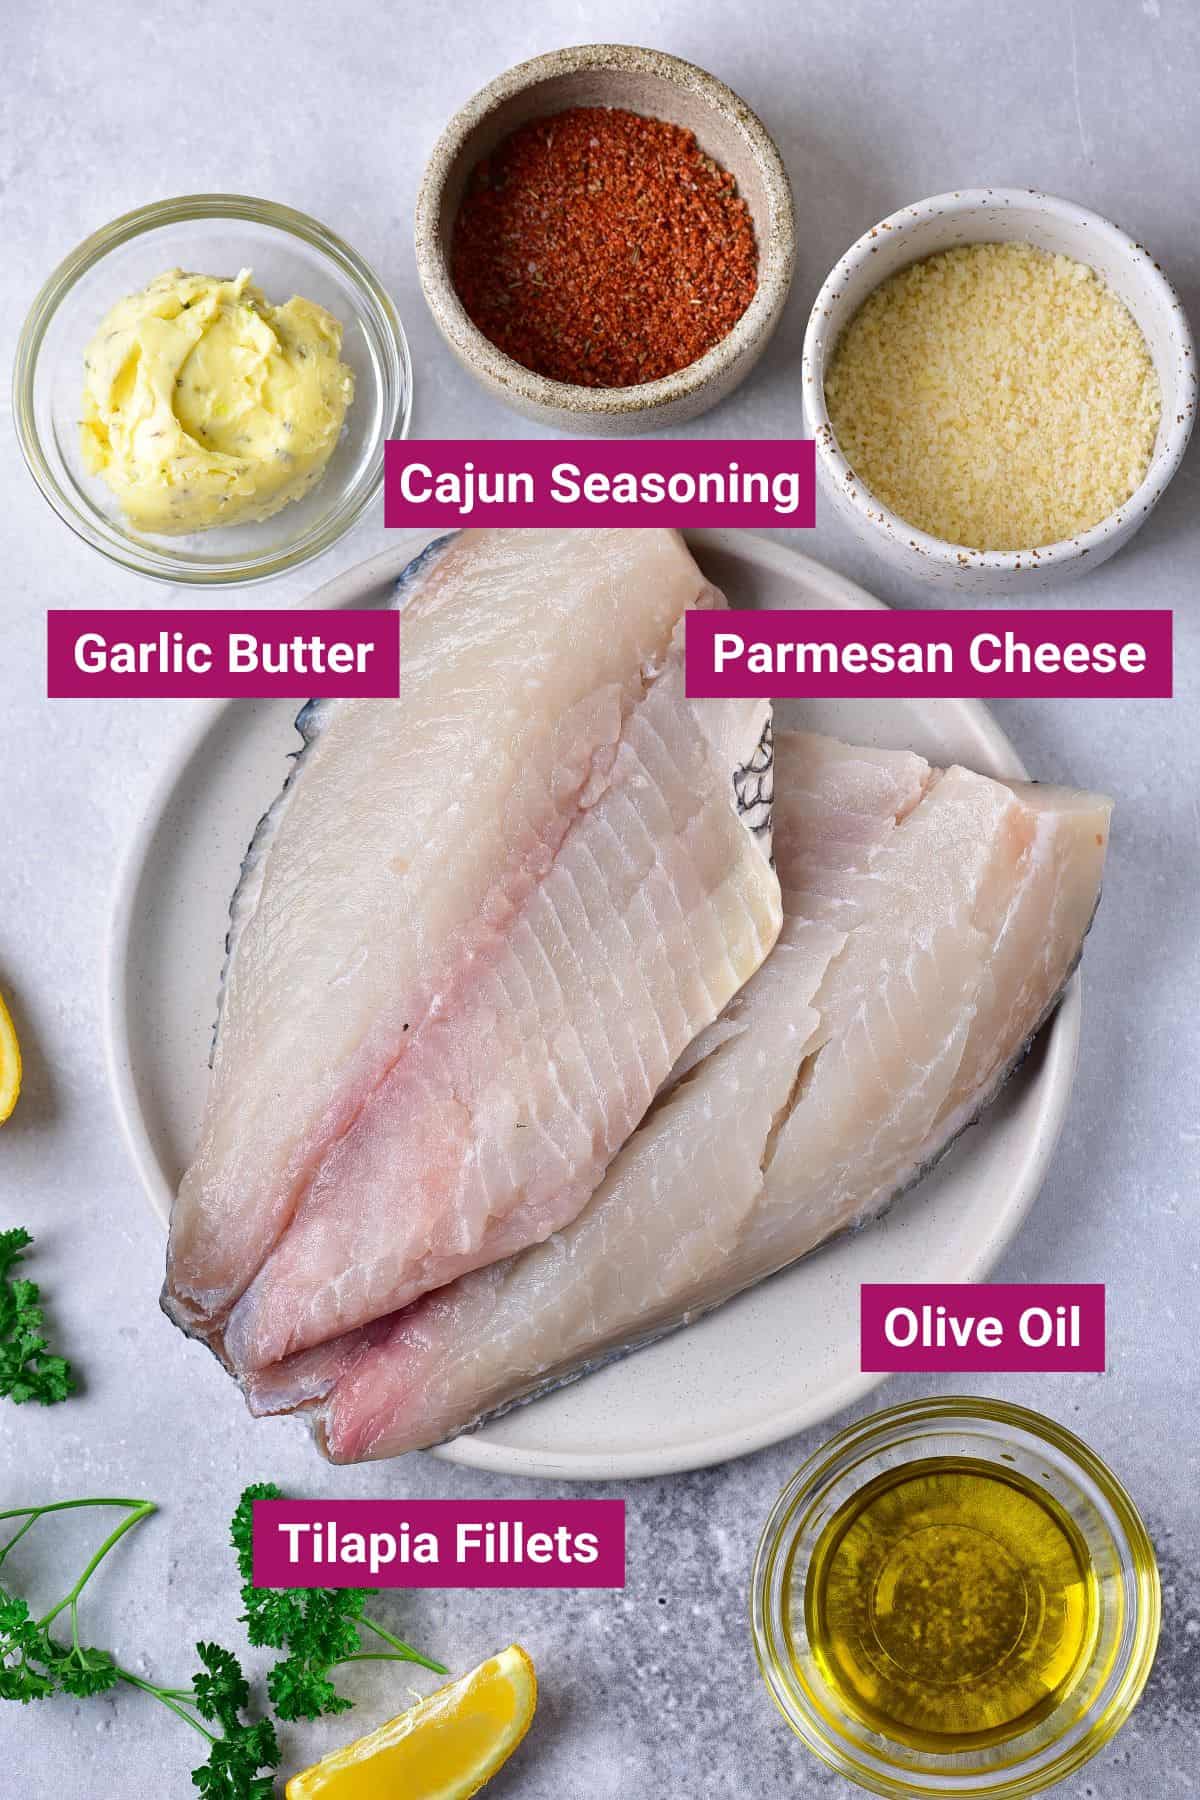 cajun seasoning, garlic butter, parmesan cheese, olive oil and tilapia fillets on separate bowls